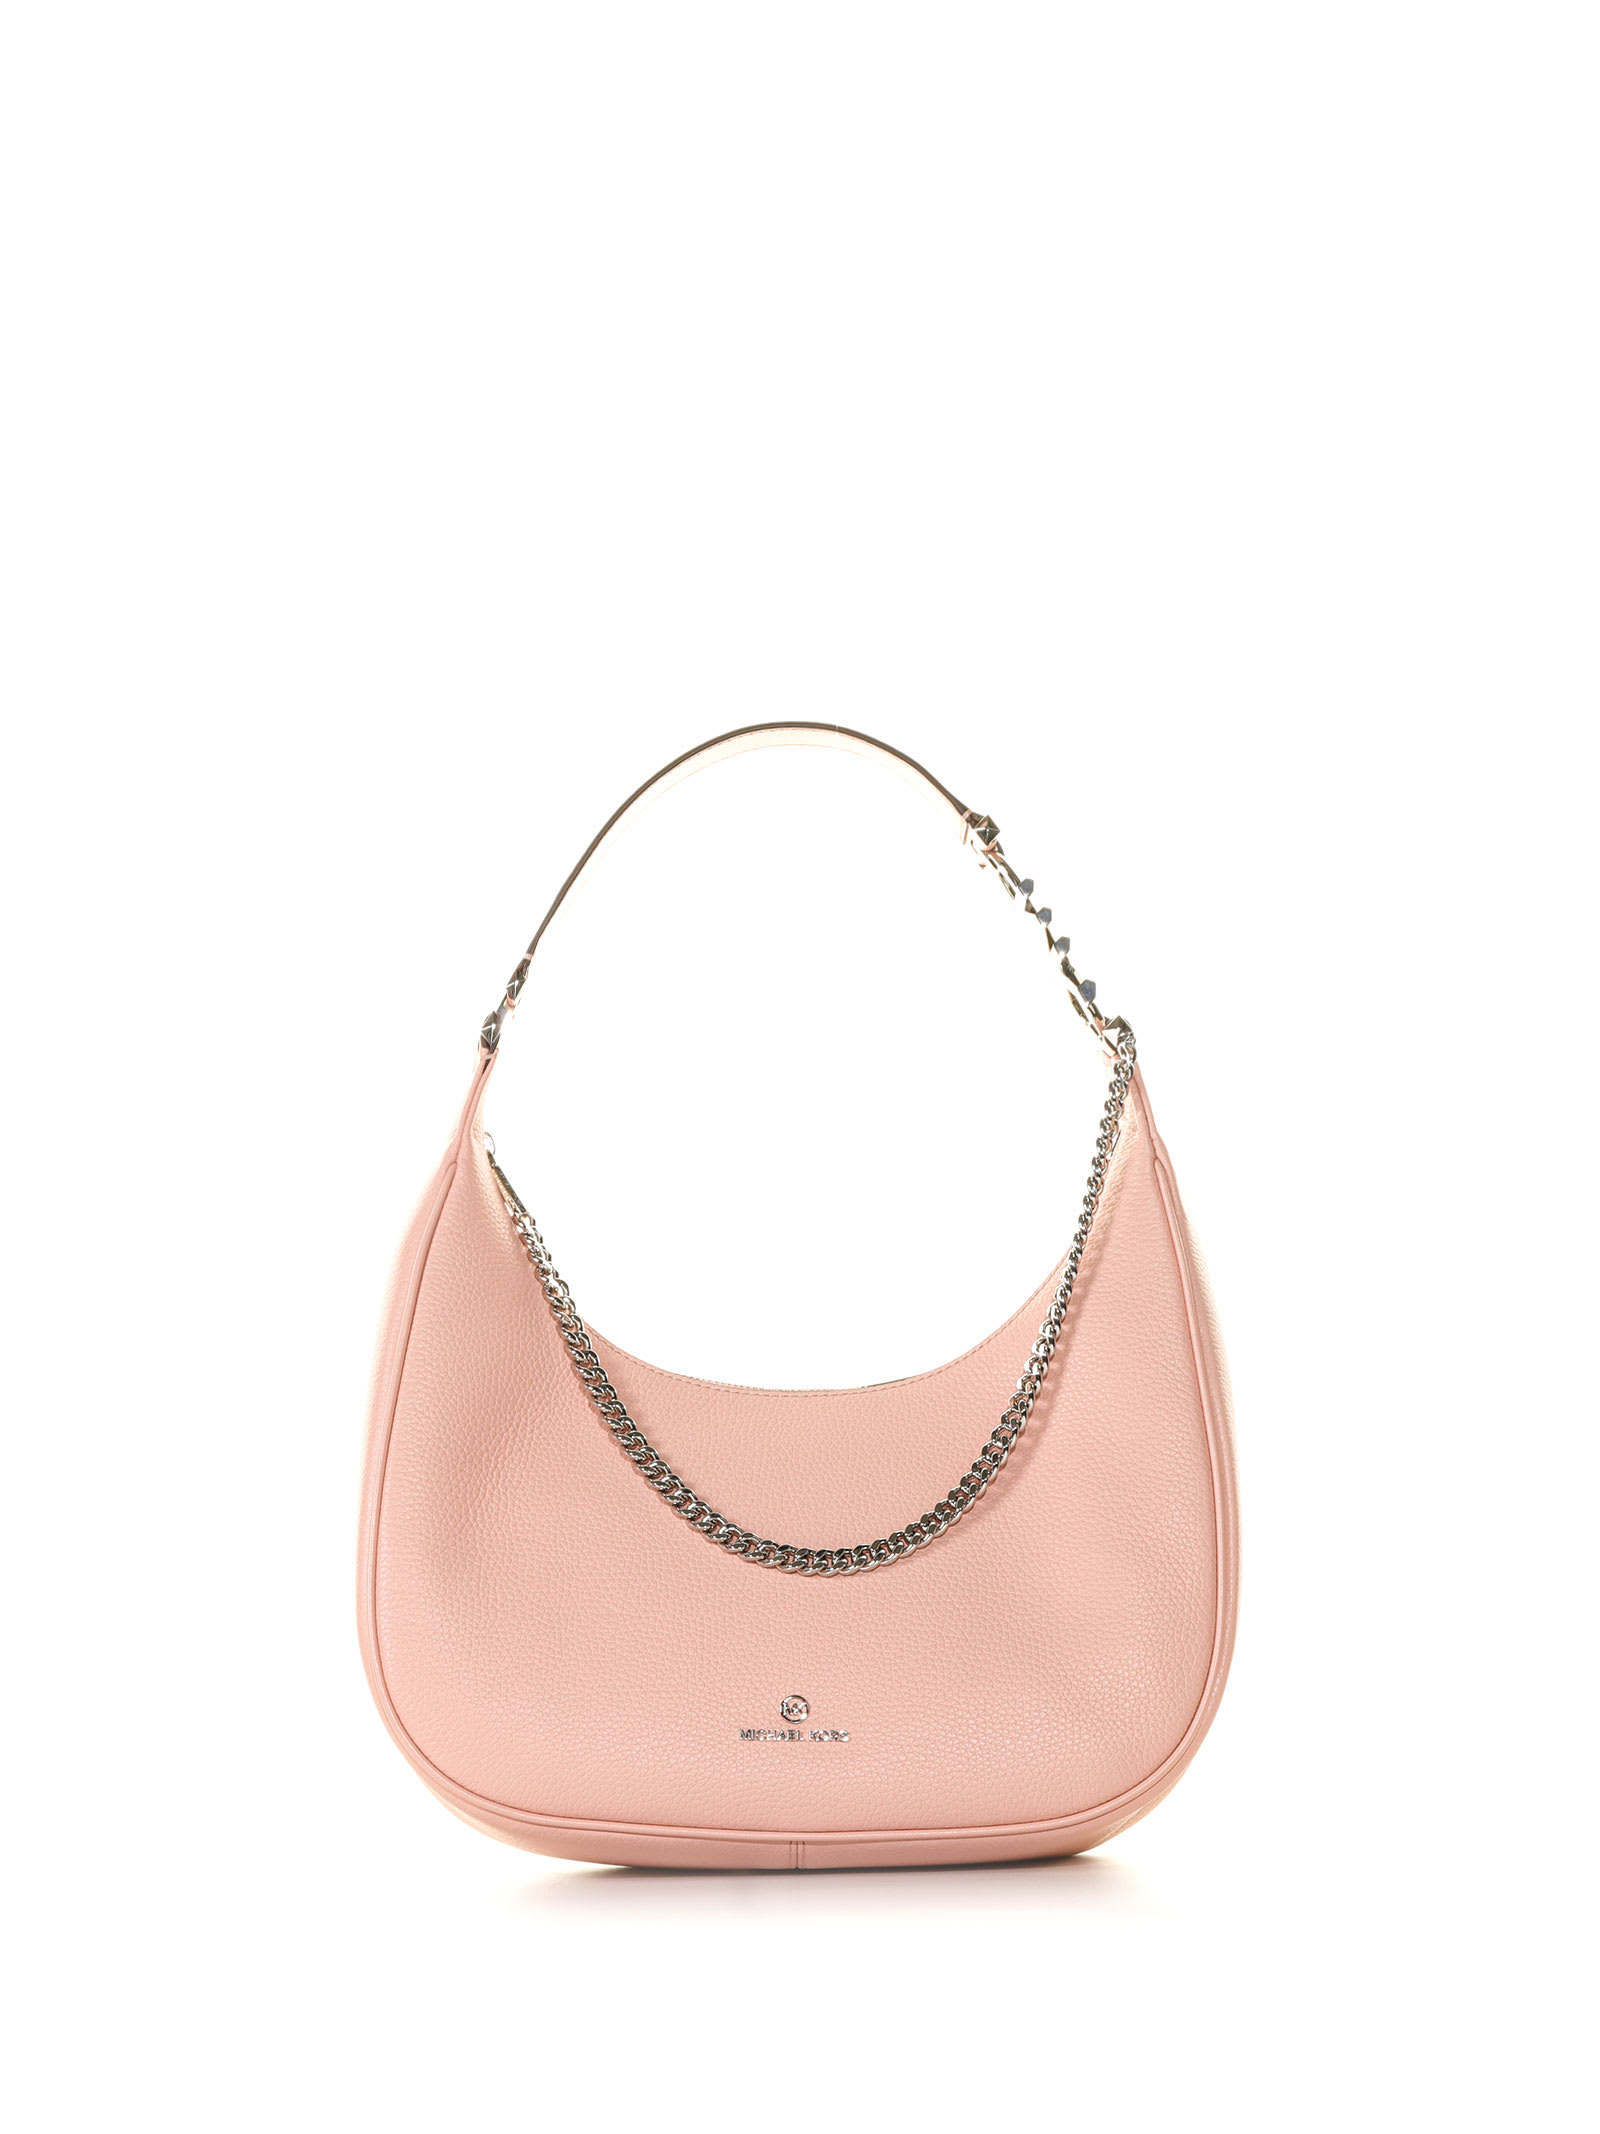 Michael Kors Leather Shoulder Bag With Chain